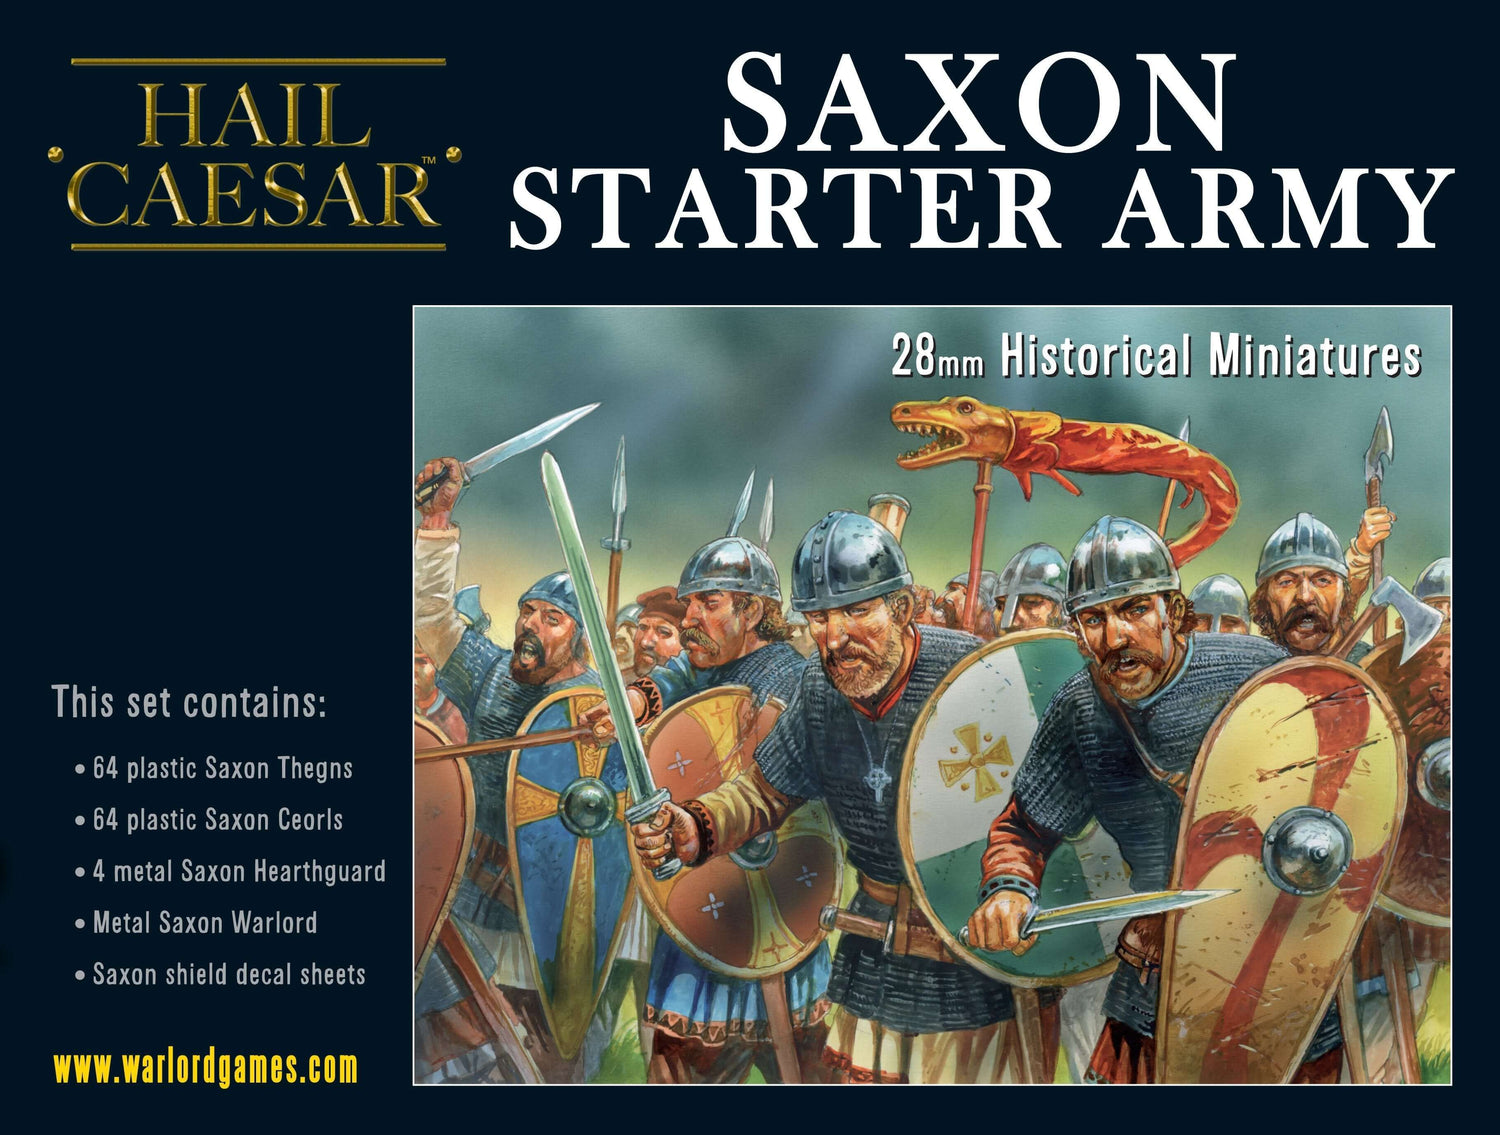 Saxon Starter Army by Warlord